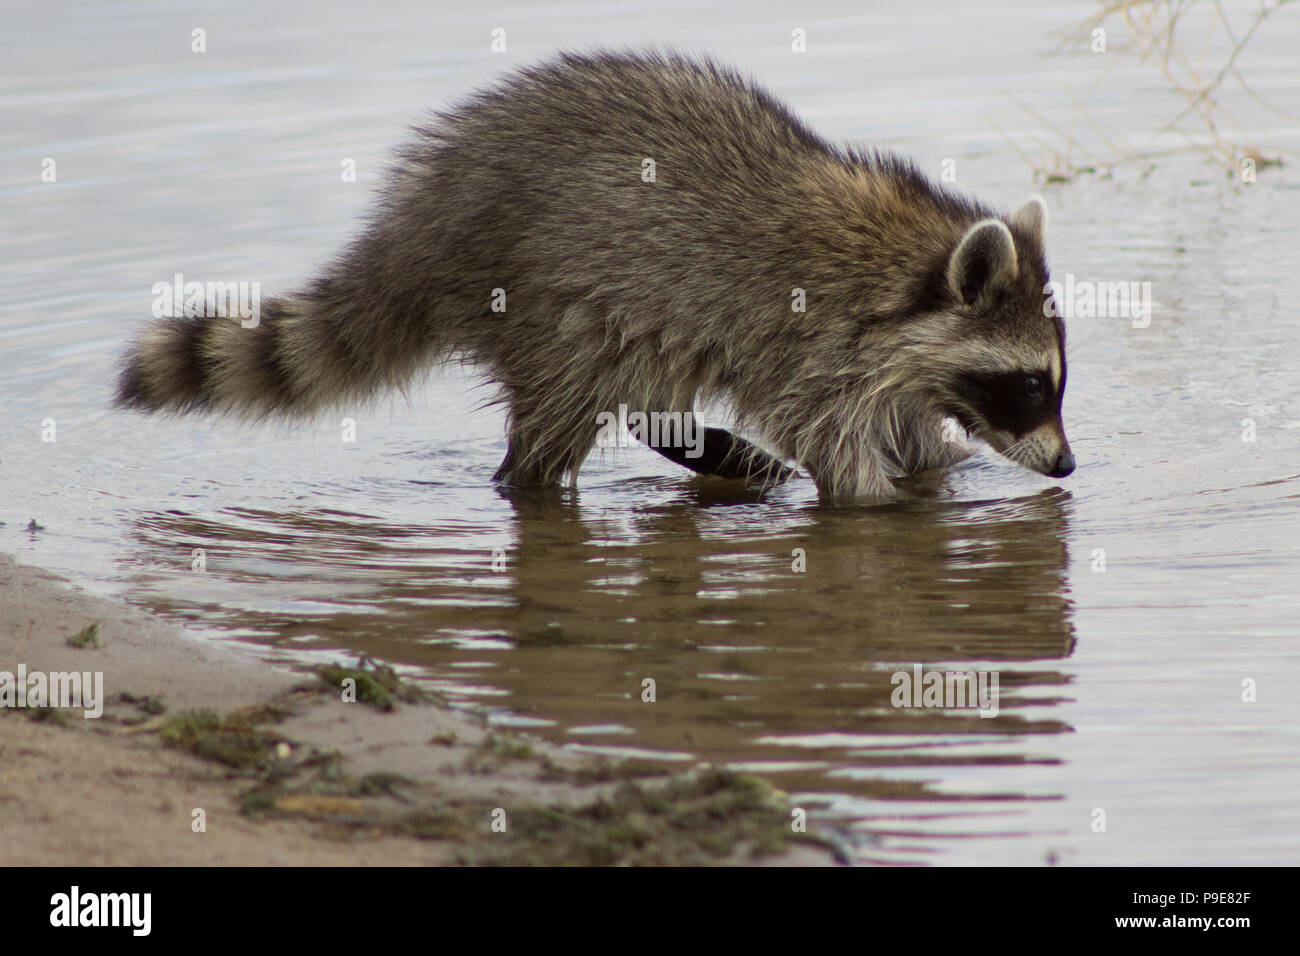 Racoon foraging for food in water near shore Stock Photo